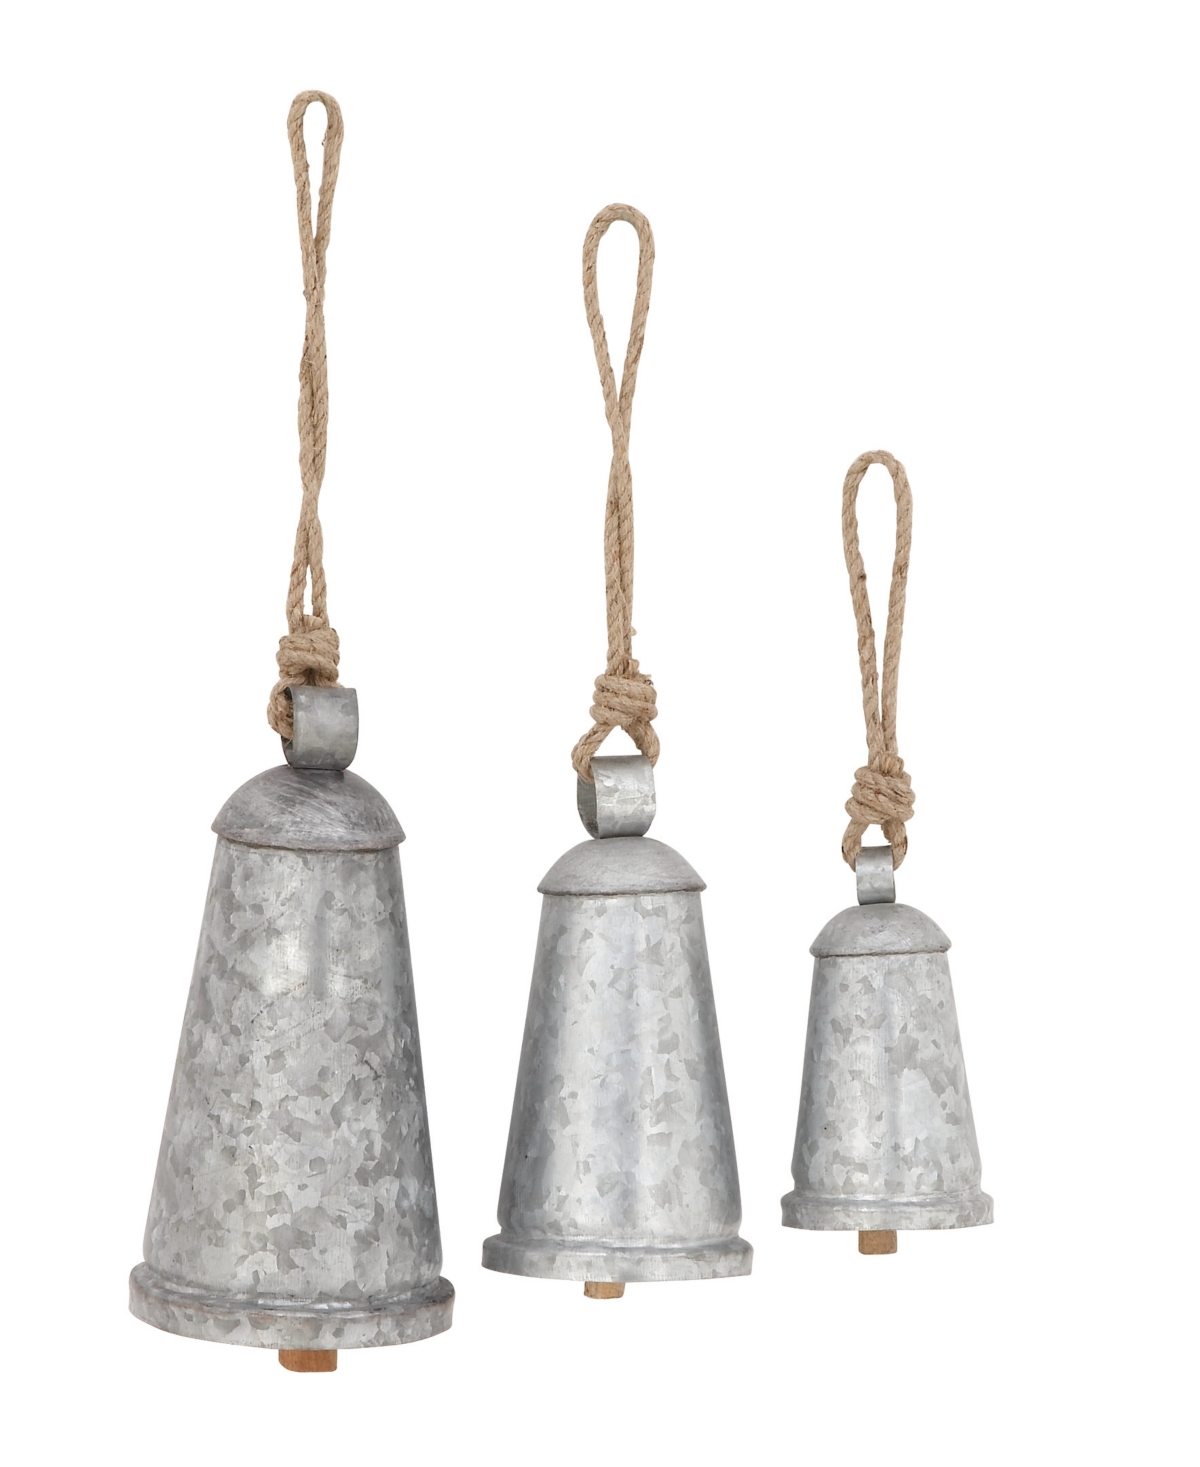 Rosemary Lane Black Metal Bohemian Decorative Cow Bell With Jute Hanging Rope Set 3 Pieces In Gray